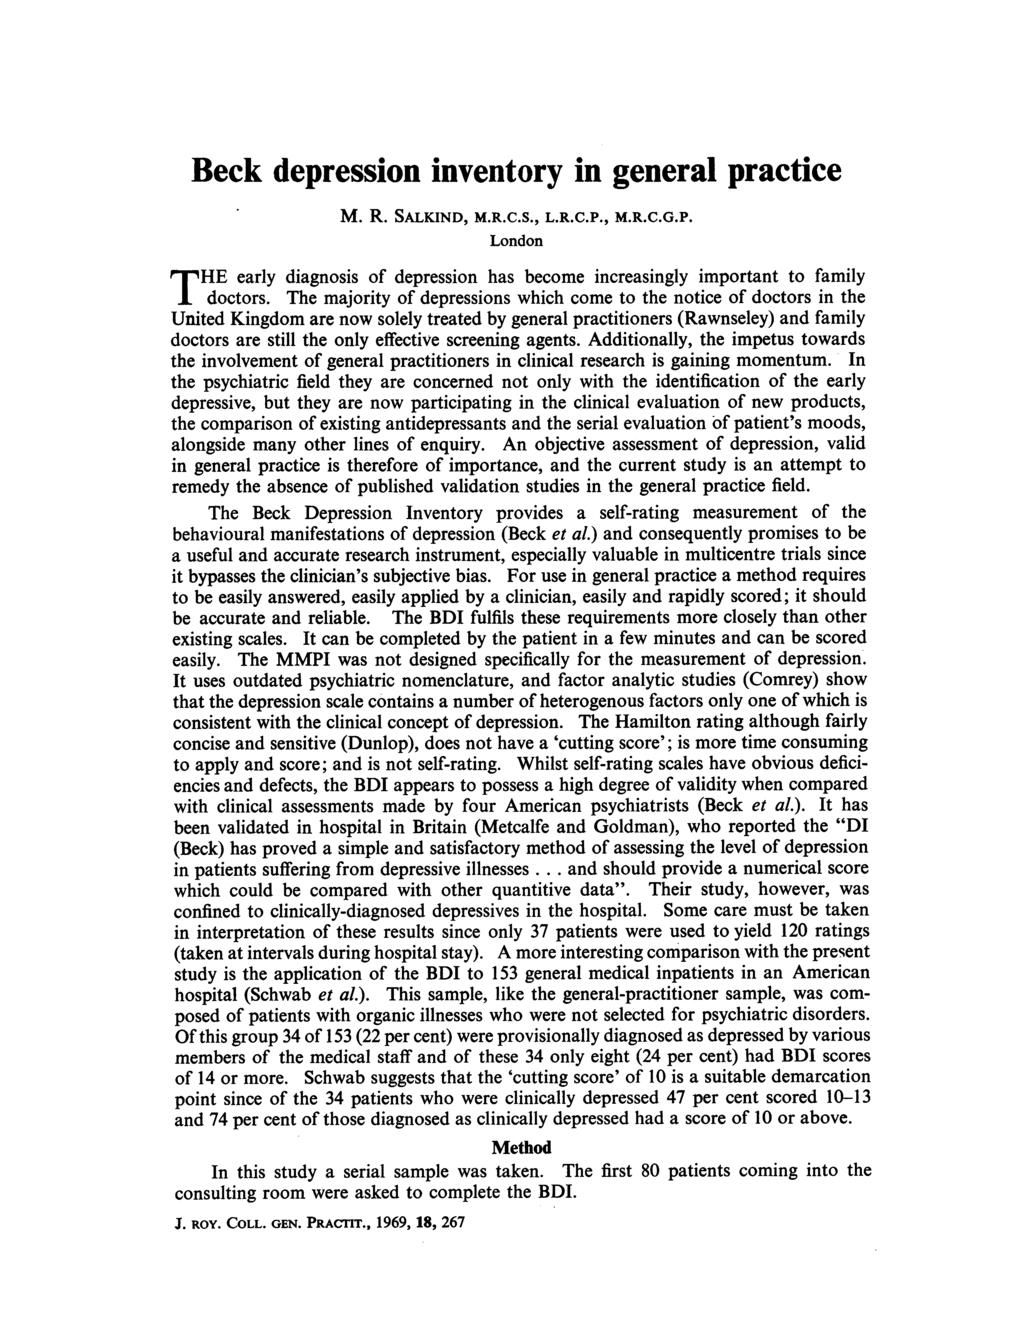 Beck depression inventory in general practice M. R. SALKIND, M.R.C.S., L.R.C.P., M.R.C.G.P. London THE early diagnosis of depression has become increasingly important to family doctors.